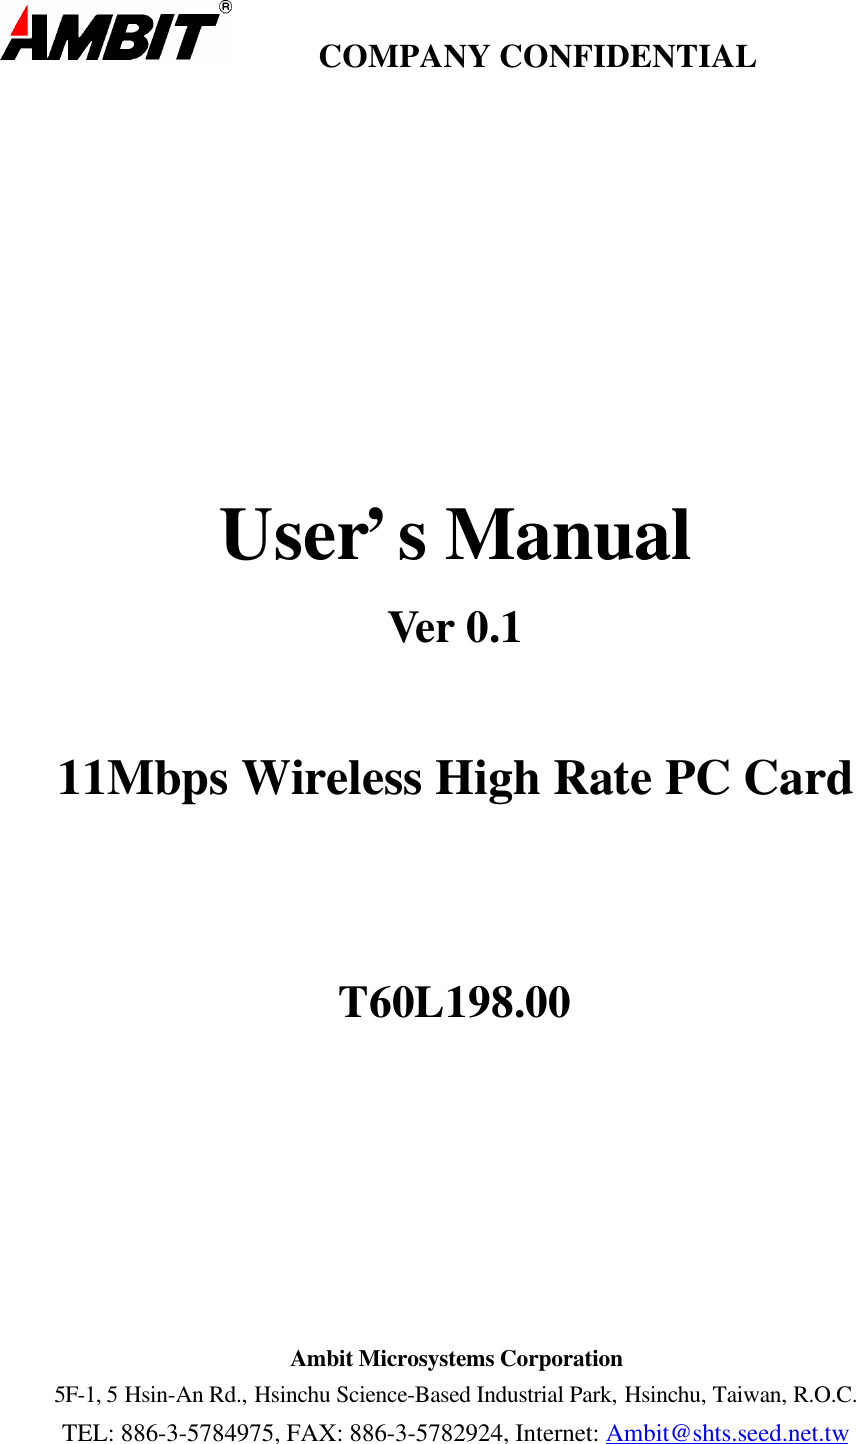         COMPANY CONFIDENTIALUser’s ManualVer 0.111Mbps Wireless High Rate PC CardT60L198.00Ambit Microsystems Corporation5F-1, 5 Hsin-An Rd., Hsinchu Science-Based Industrial Park, Hsinchu, Taiwan, R.O.C.TEL: 886-3-5784975, FAX: 886-3-5782924, Internet: Ambit@shts.seed.net.tw